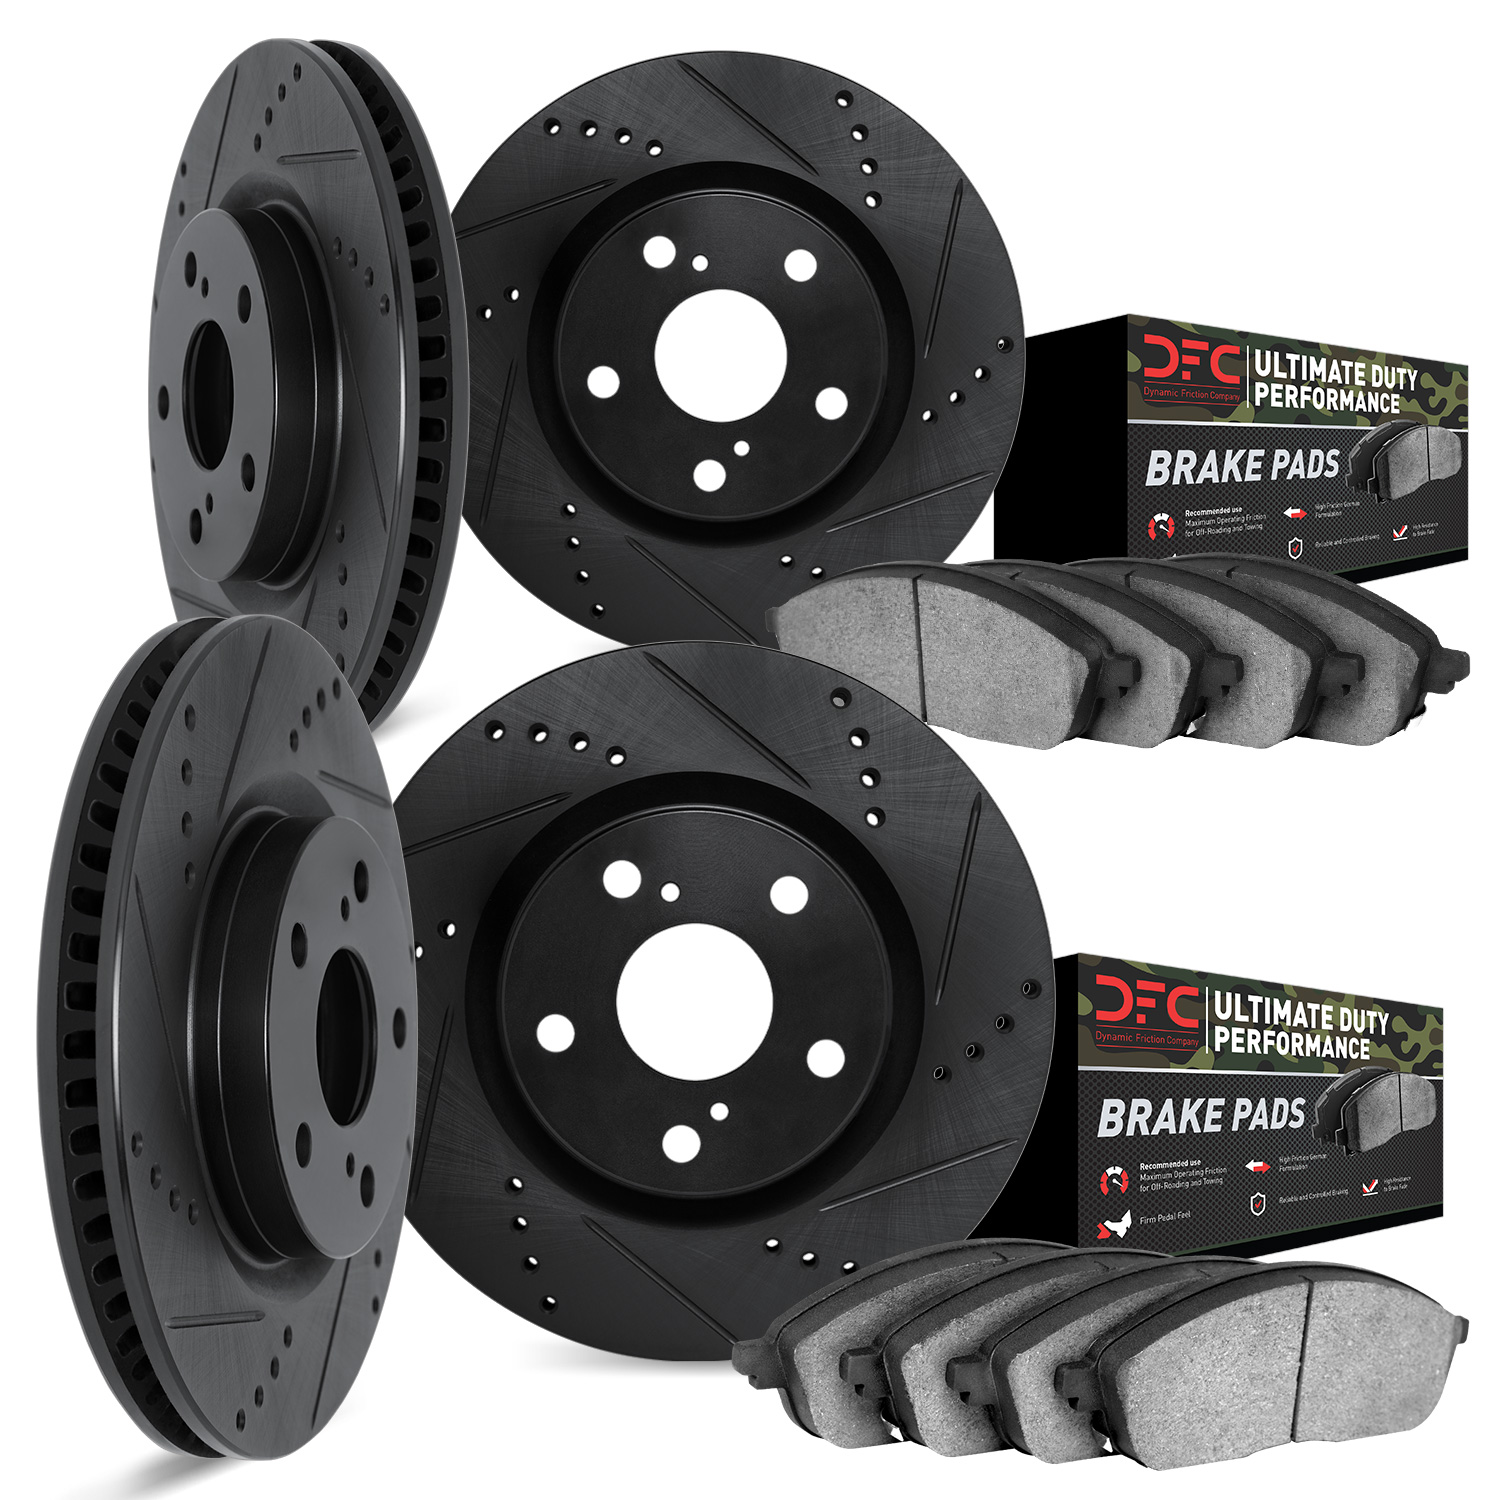 8404-48001 Drilled/Slotted Brake Rotors with Ultimate-Duty Brake Pads Kit [Black], 1997-2005 GM, Position: Front and Rear